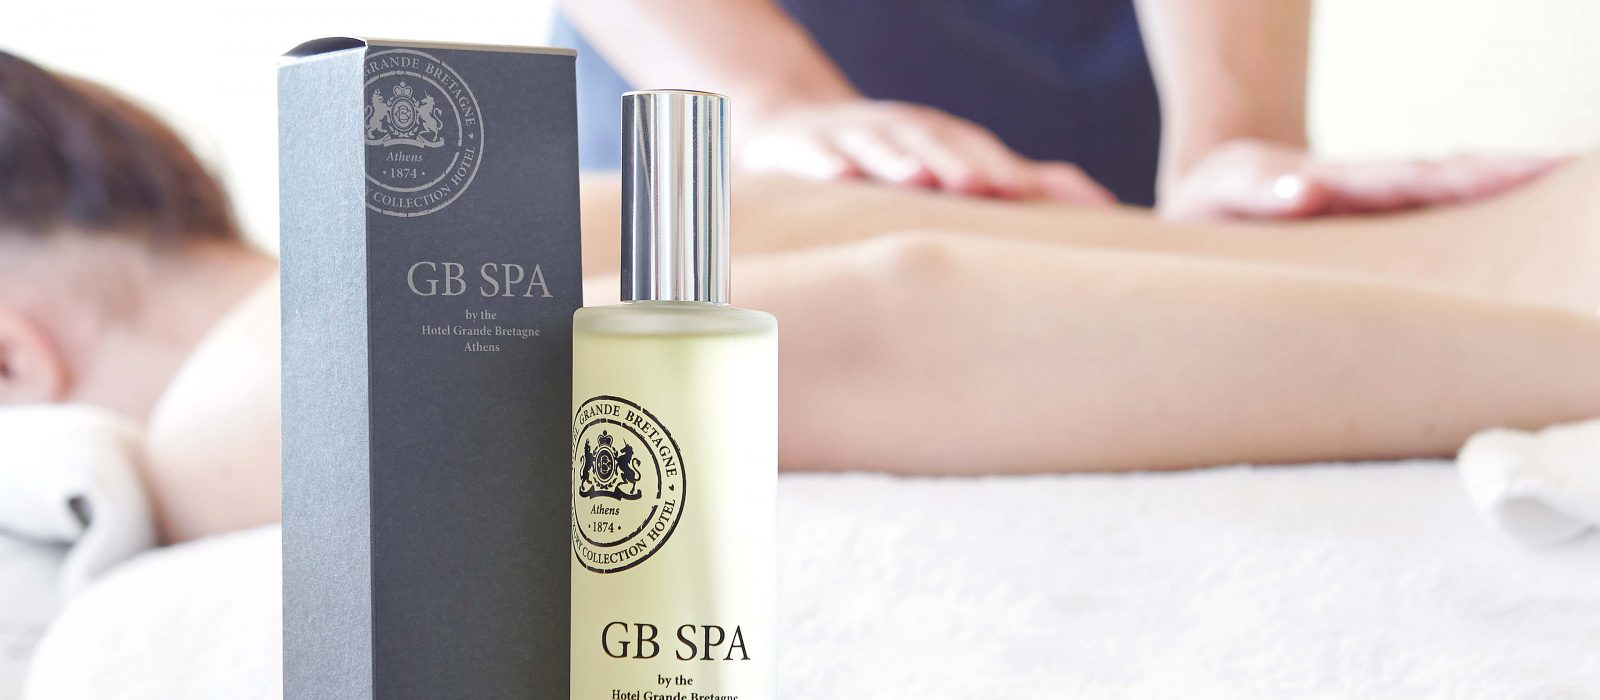 Spa Treatments - Spa Packages | GB Spa, Best Spa in Athens